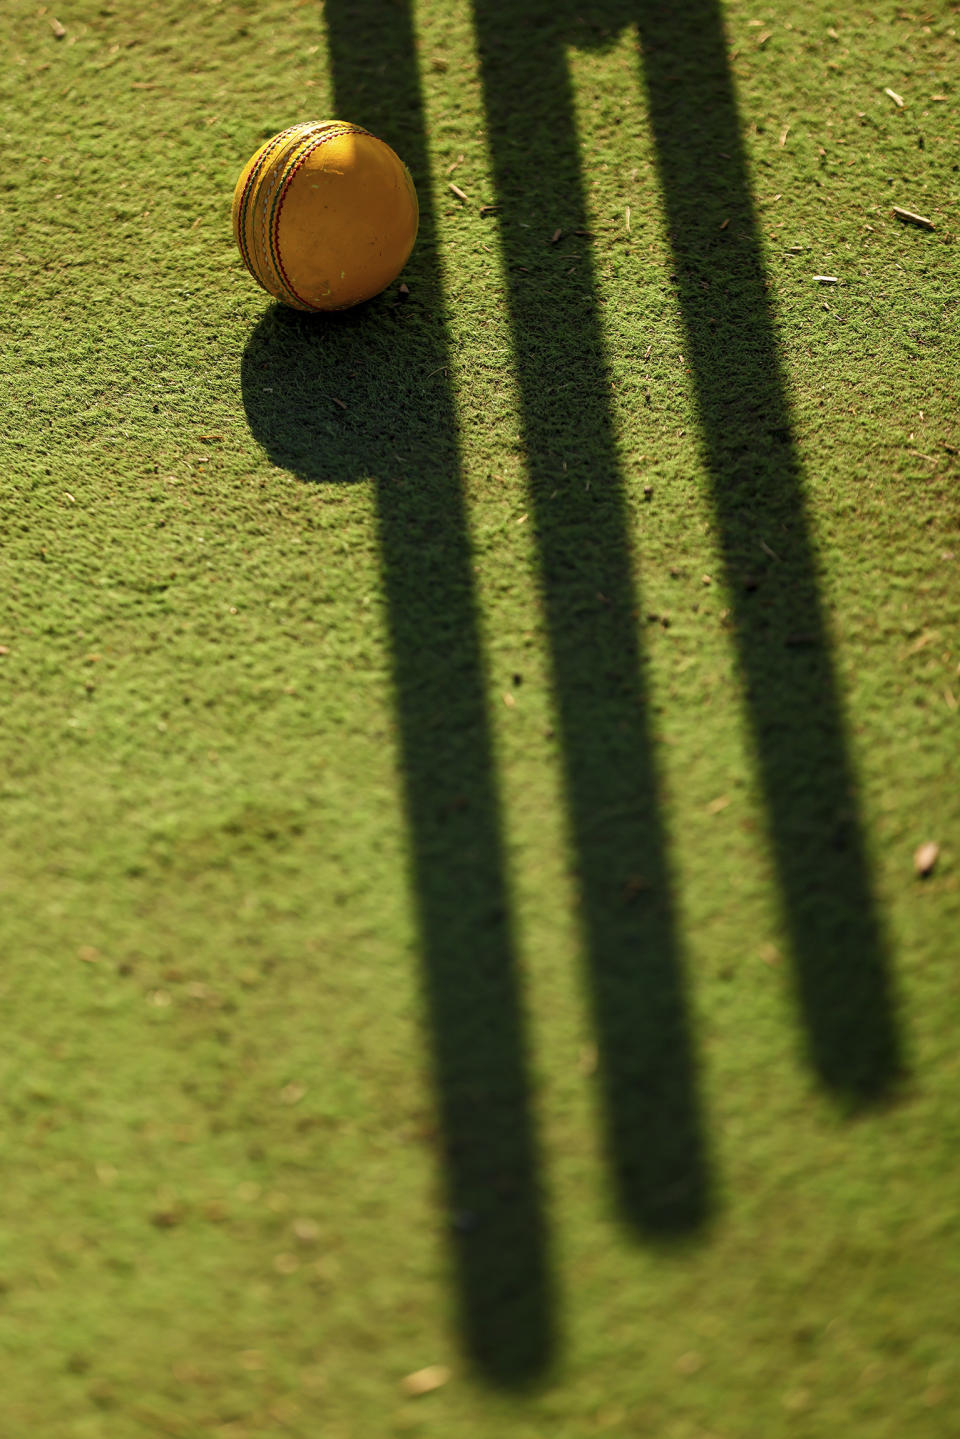 A ball sits near the wicket during a match between the Dallas Cricket Connections and the Kingswood Cricket Club on a field adjacent to Roach Middle School in Frisco, Texas, Saturday, Oct. 22, 2022. The teams play in the City of Frisco Cricket league. (AP Photo/Andy Jacobsohn)